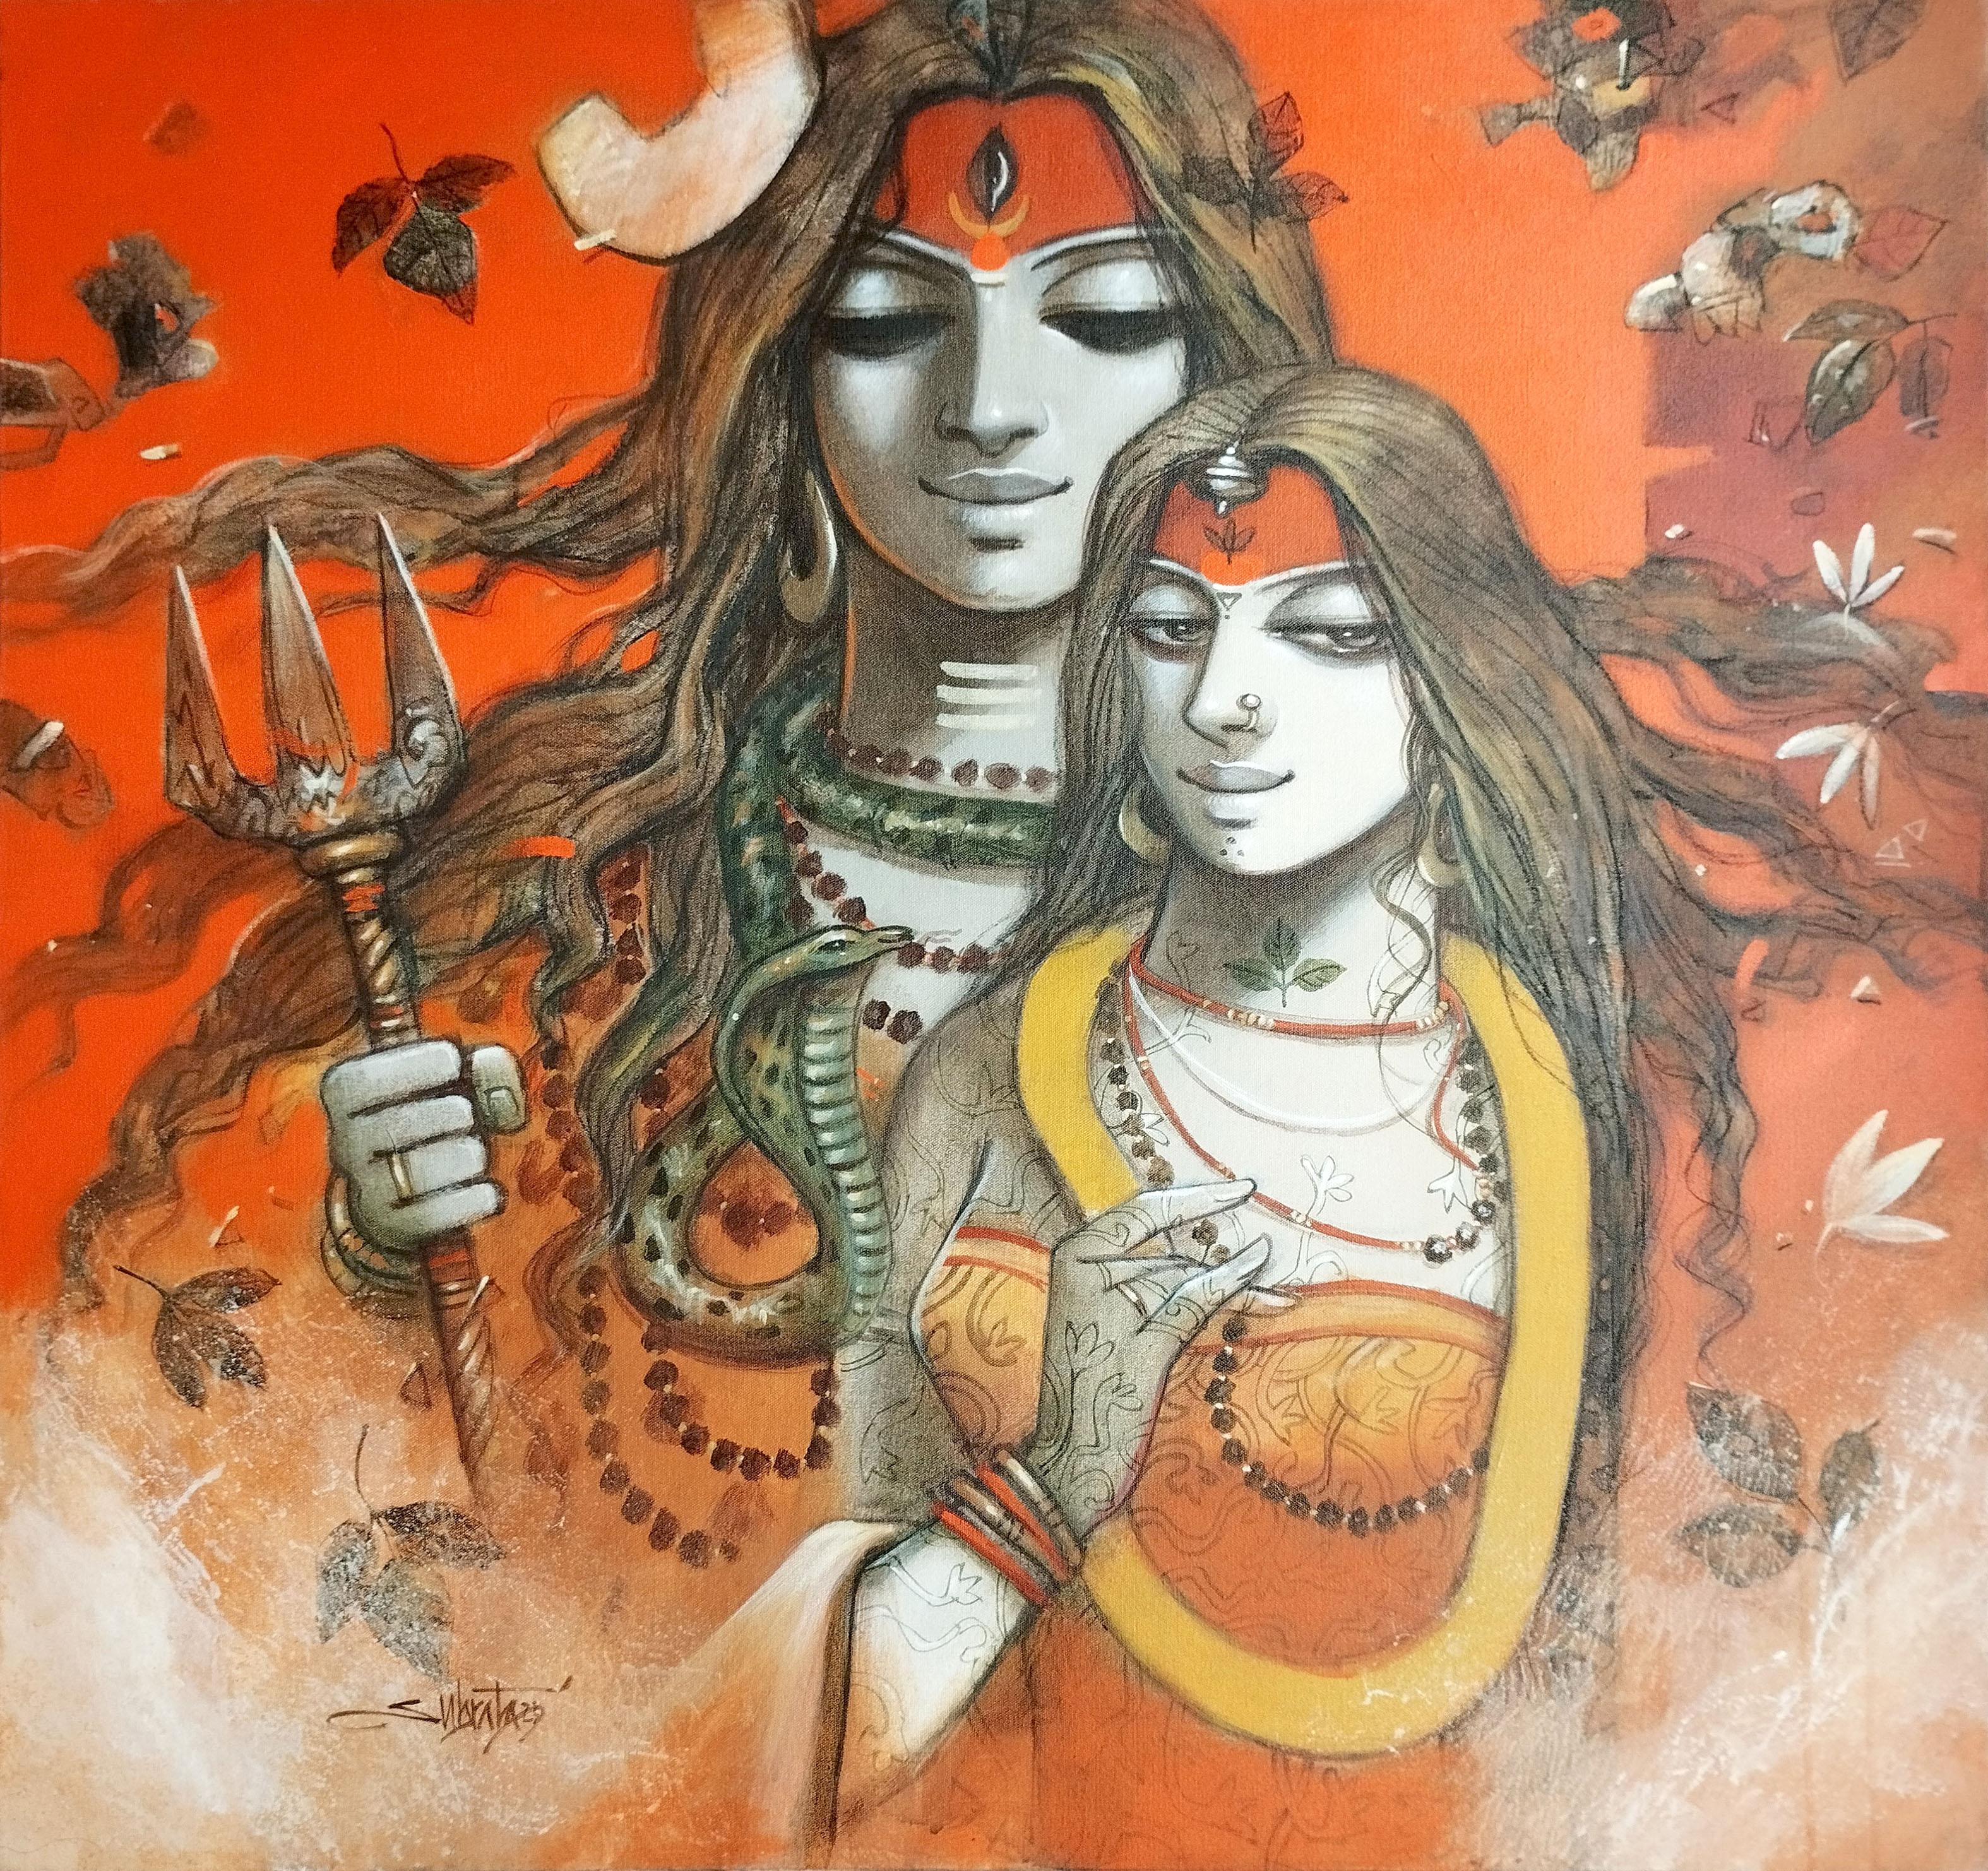 Shiva Parvati, Acrylic on Canvas by Contemporary, Red, Yellow, White "In Stock"